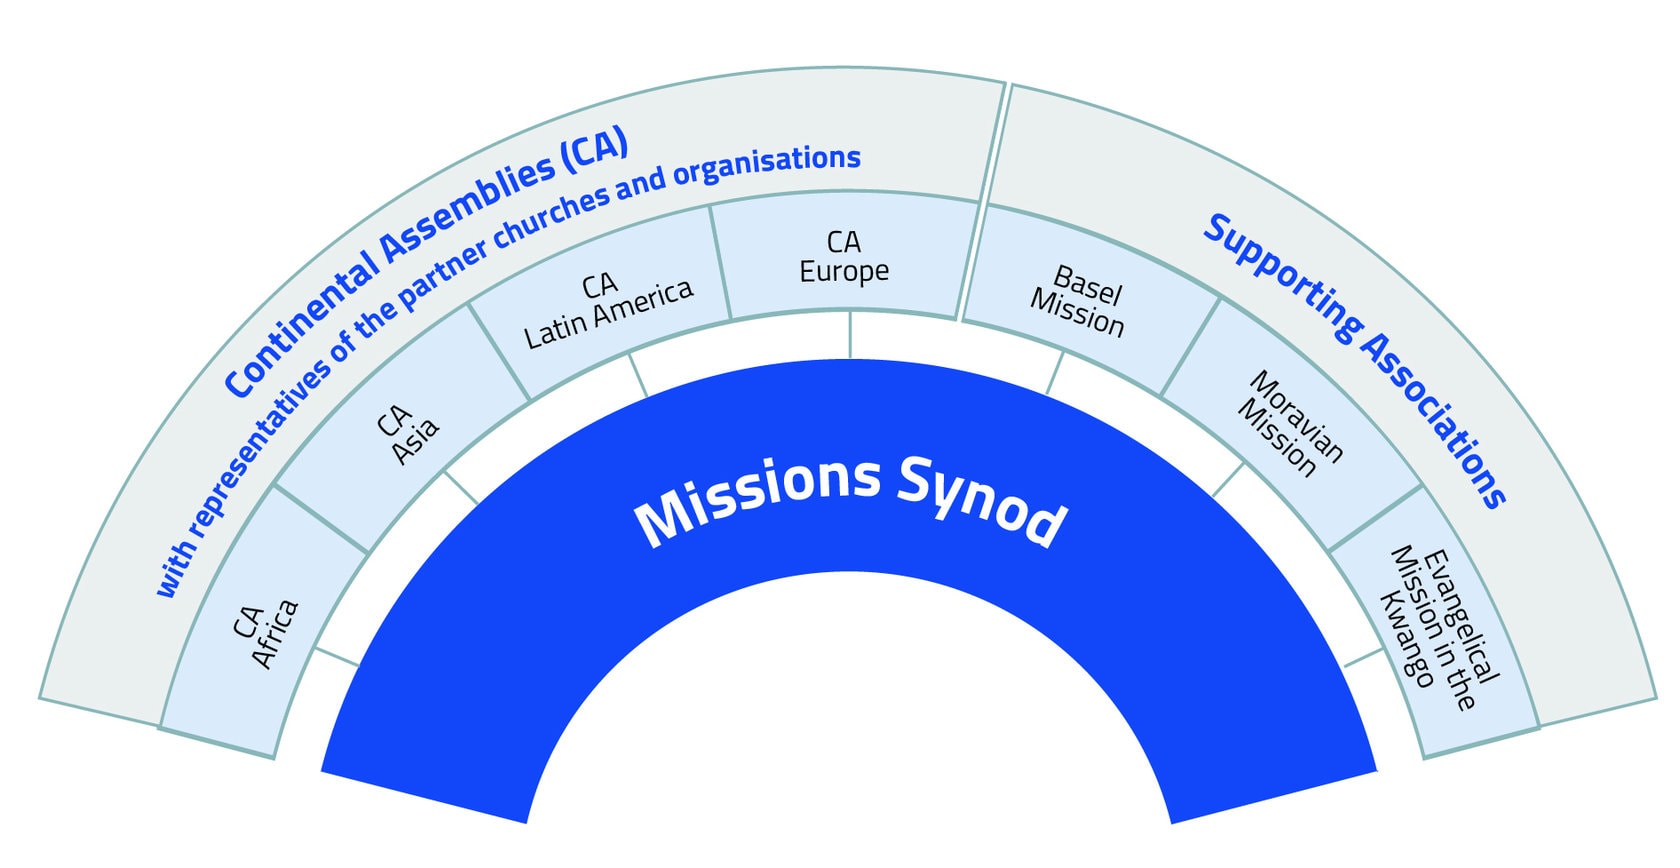 Structure of the Mission Synod